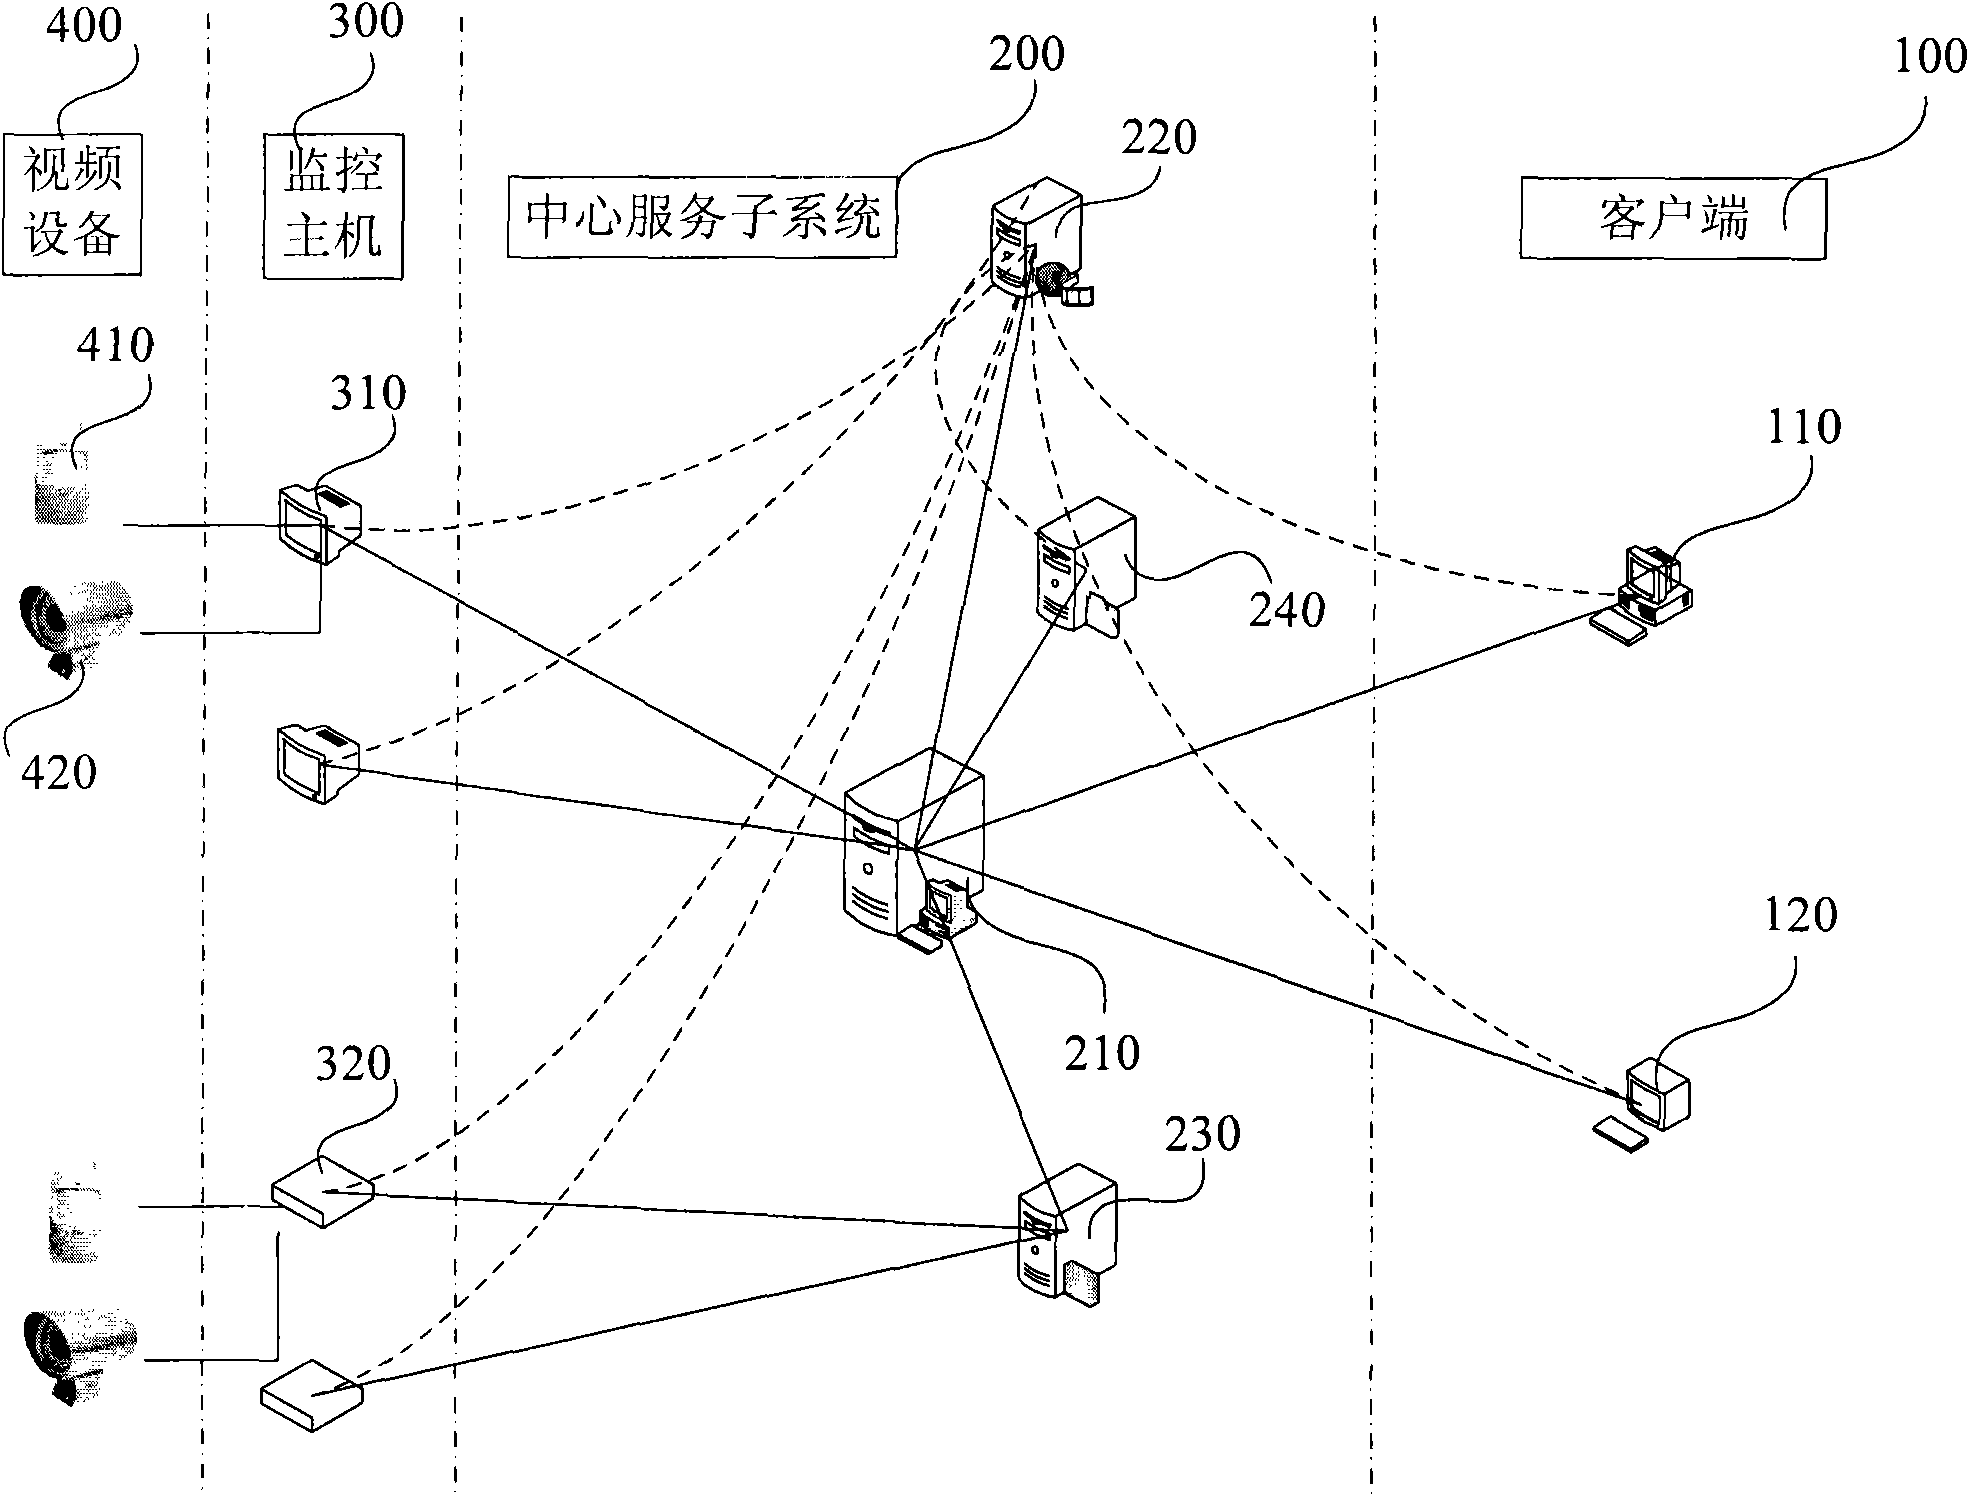 Video monitoring method and video monitoring system